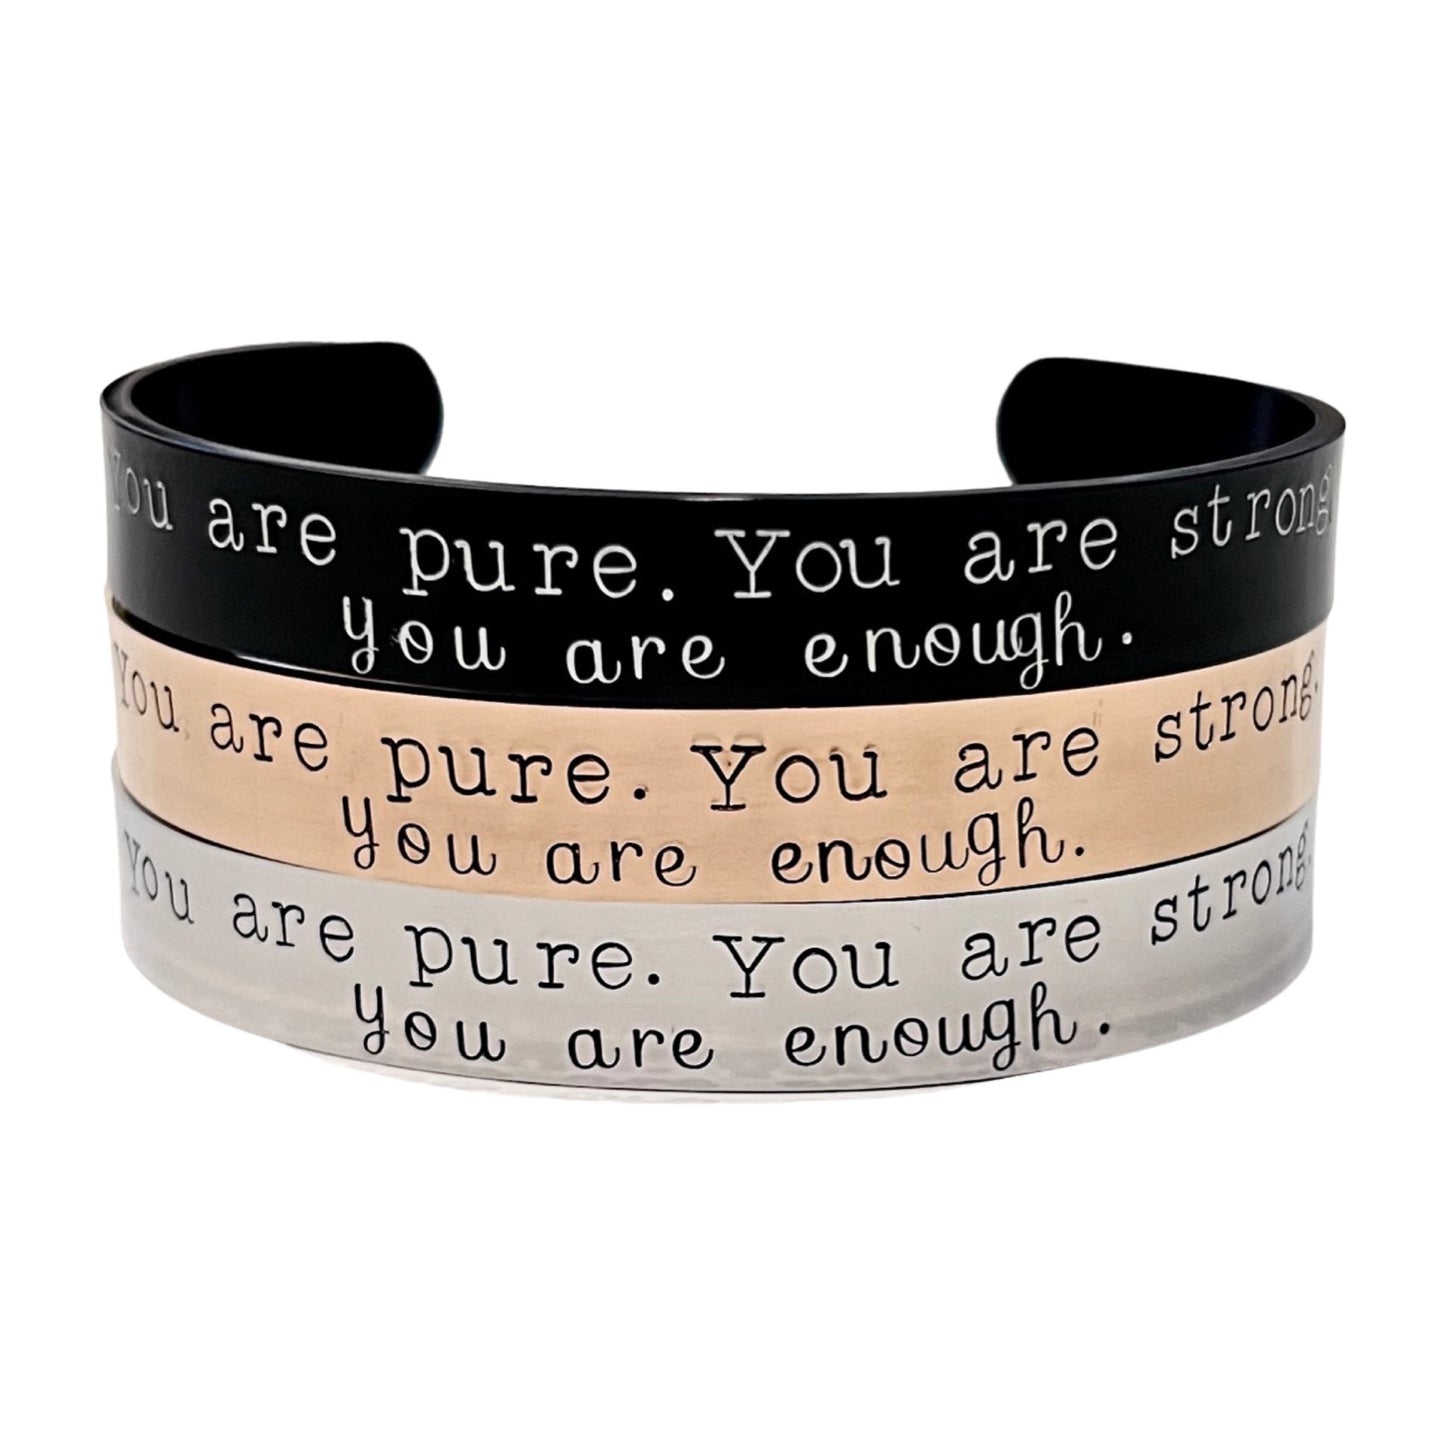 You are pure. You are strong. You are enough. | Kennedy Ryan | Cuff Bracelet